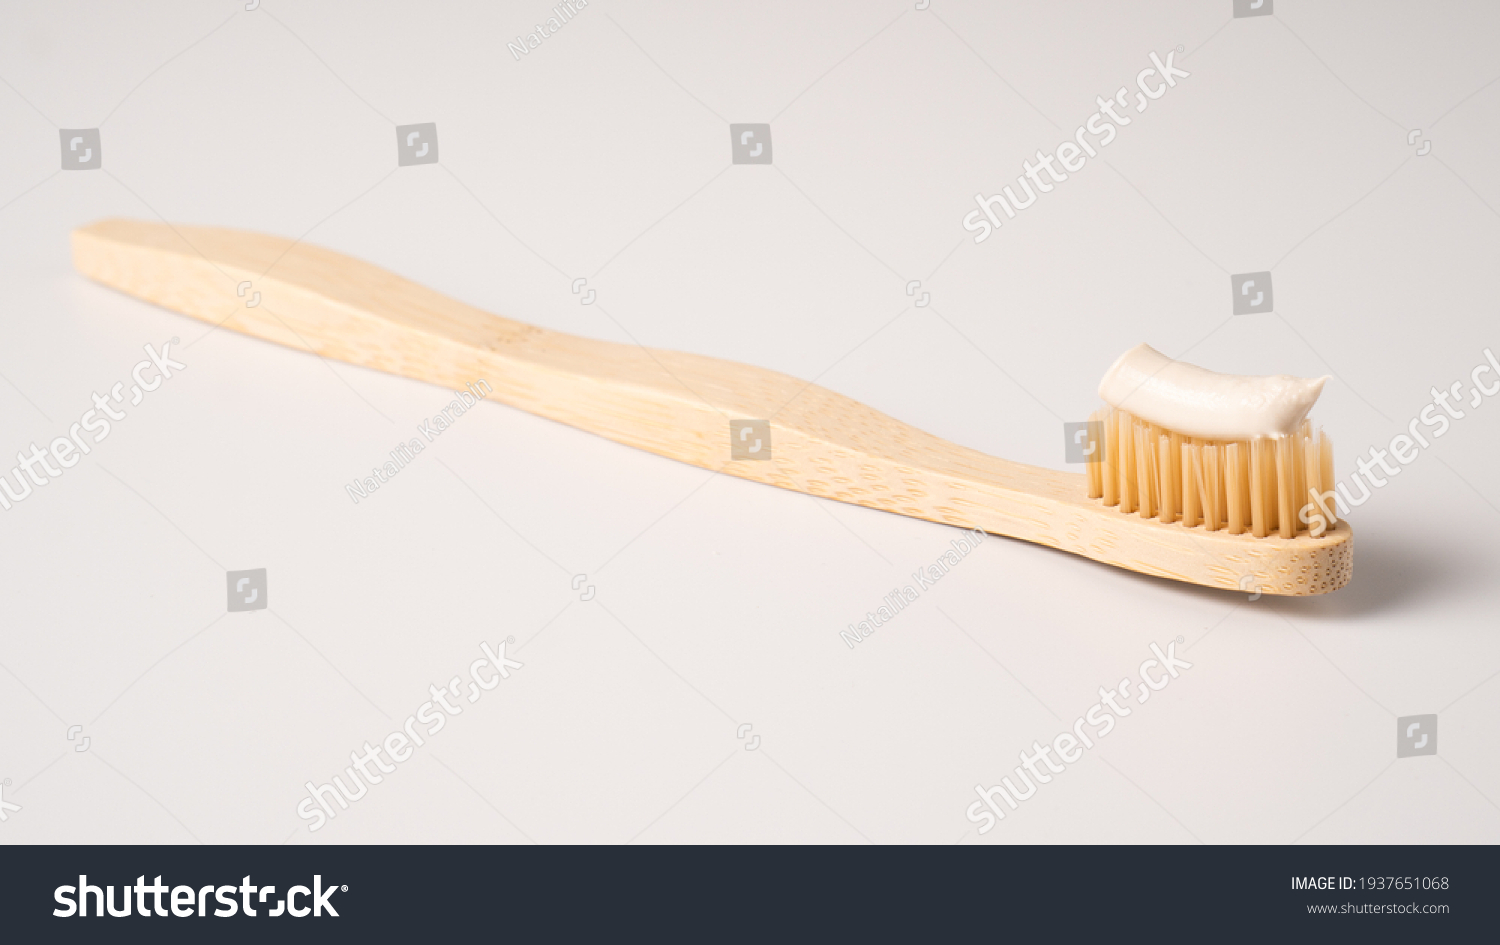 Bamboo toothbrush isolated on a white background. Eco dental concept. Zero waste #1937651068